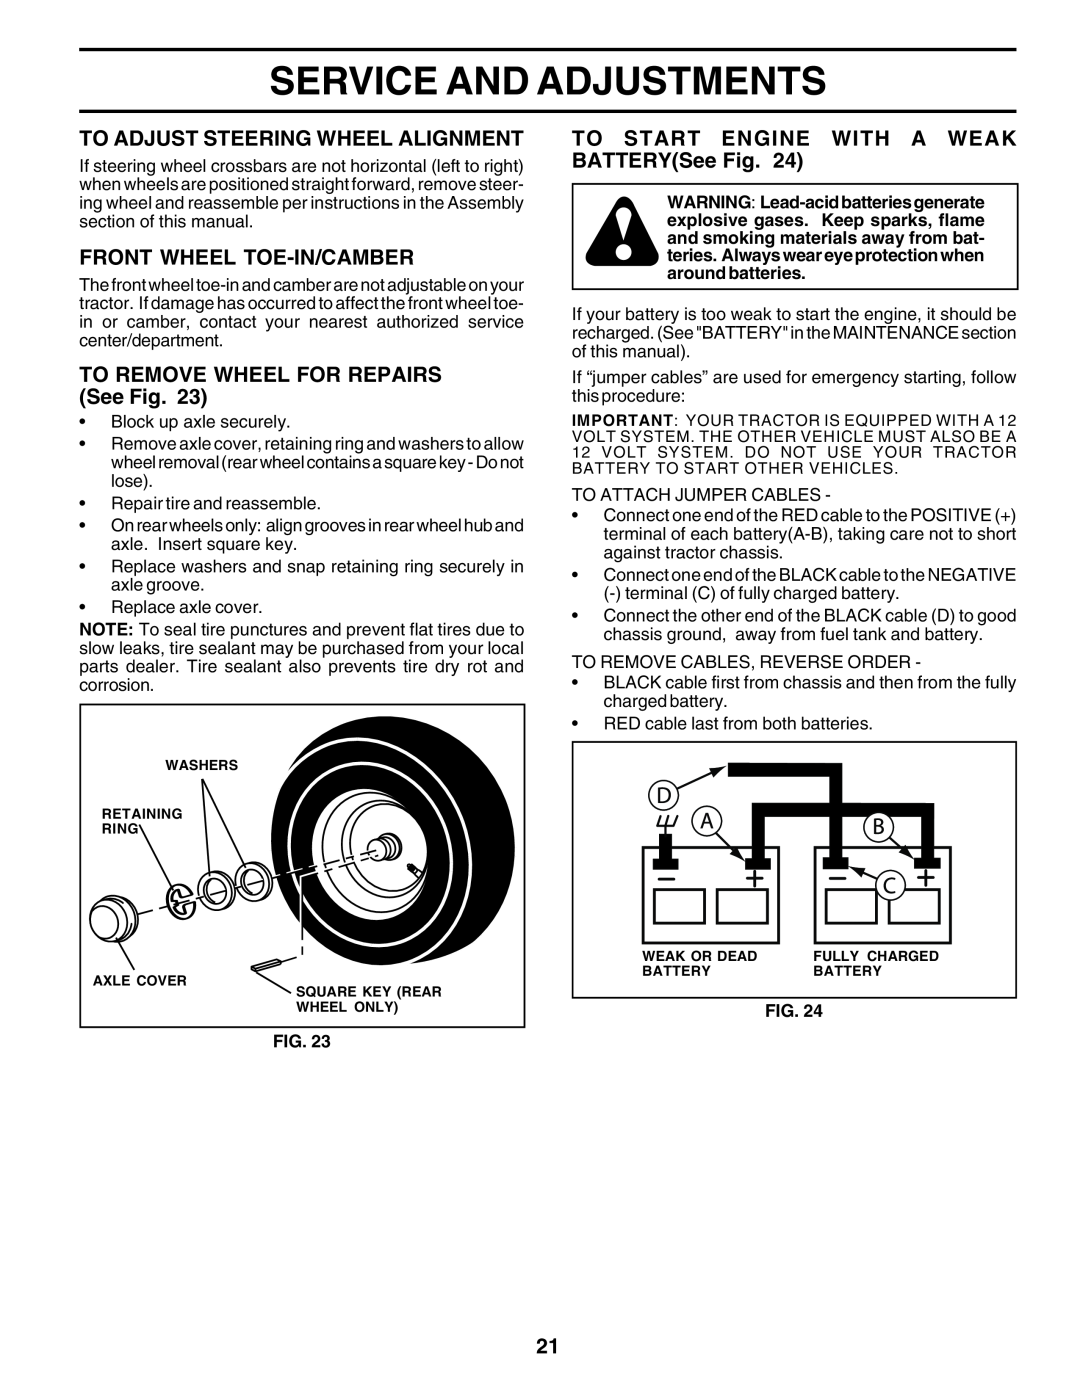 Poulan 183313 manual To Adjust Steering Wheel Alignment, Front Wheel Toe-In/Camber, TO REMOVE WHEEL FOR REPAIRS See Fig 